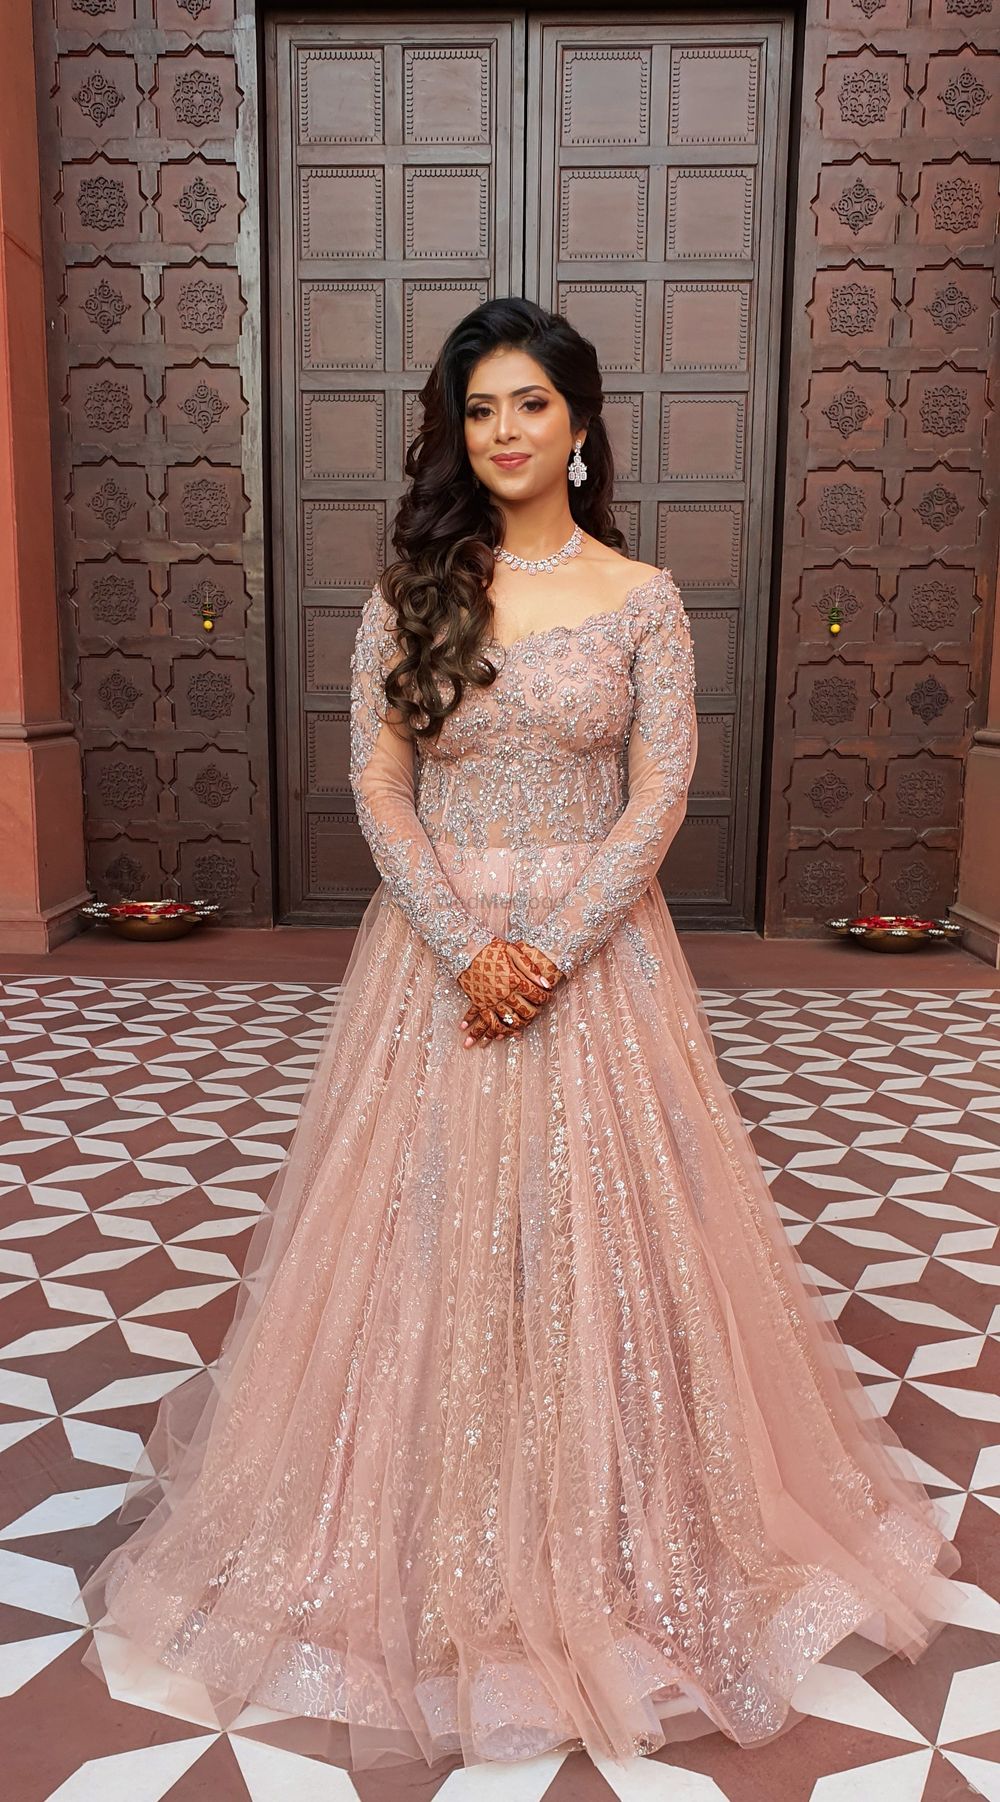 Photo From Princess Engagement Look - By Makeup Artist Rinee Bindra